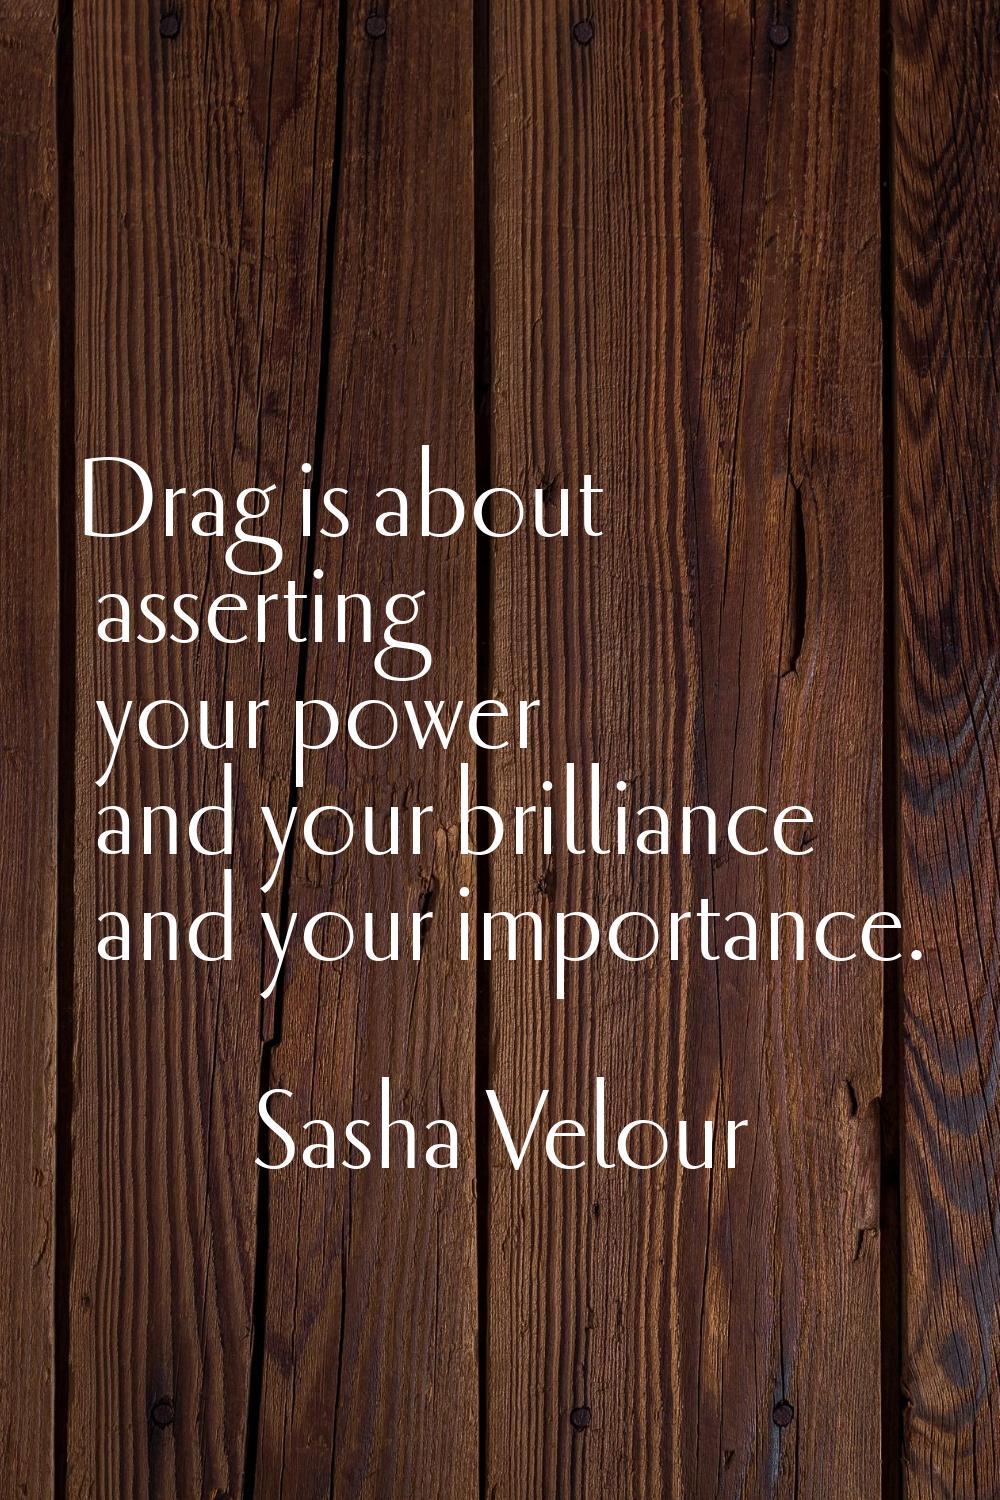 Drag is about asserting your power and your brilliance and your importance.